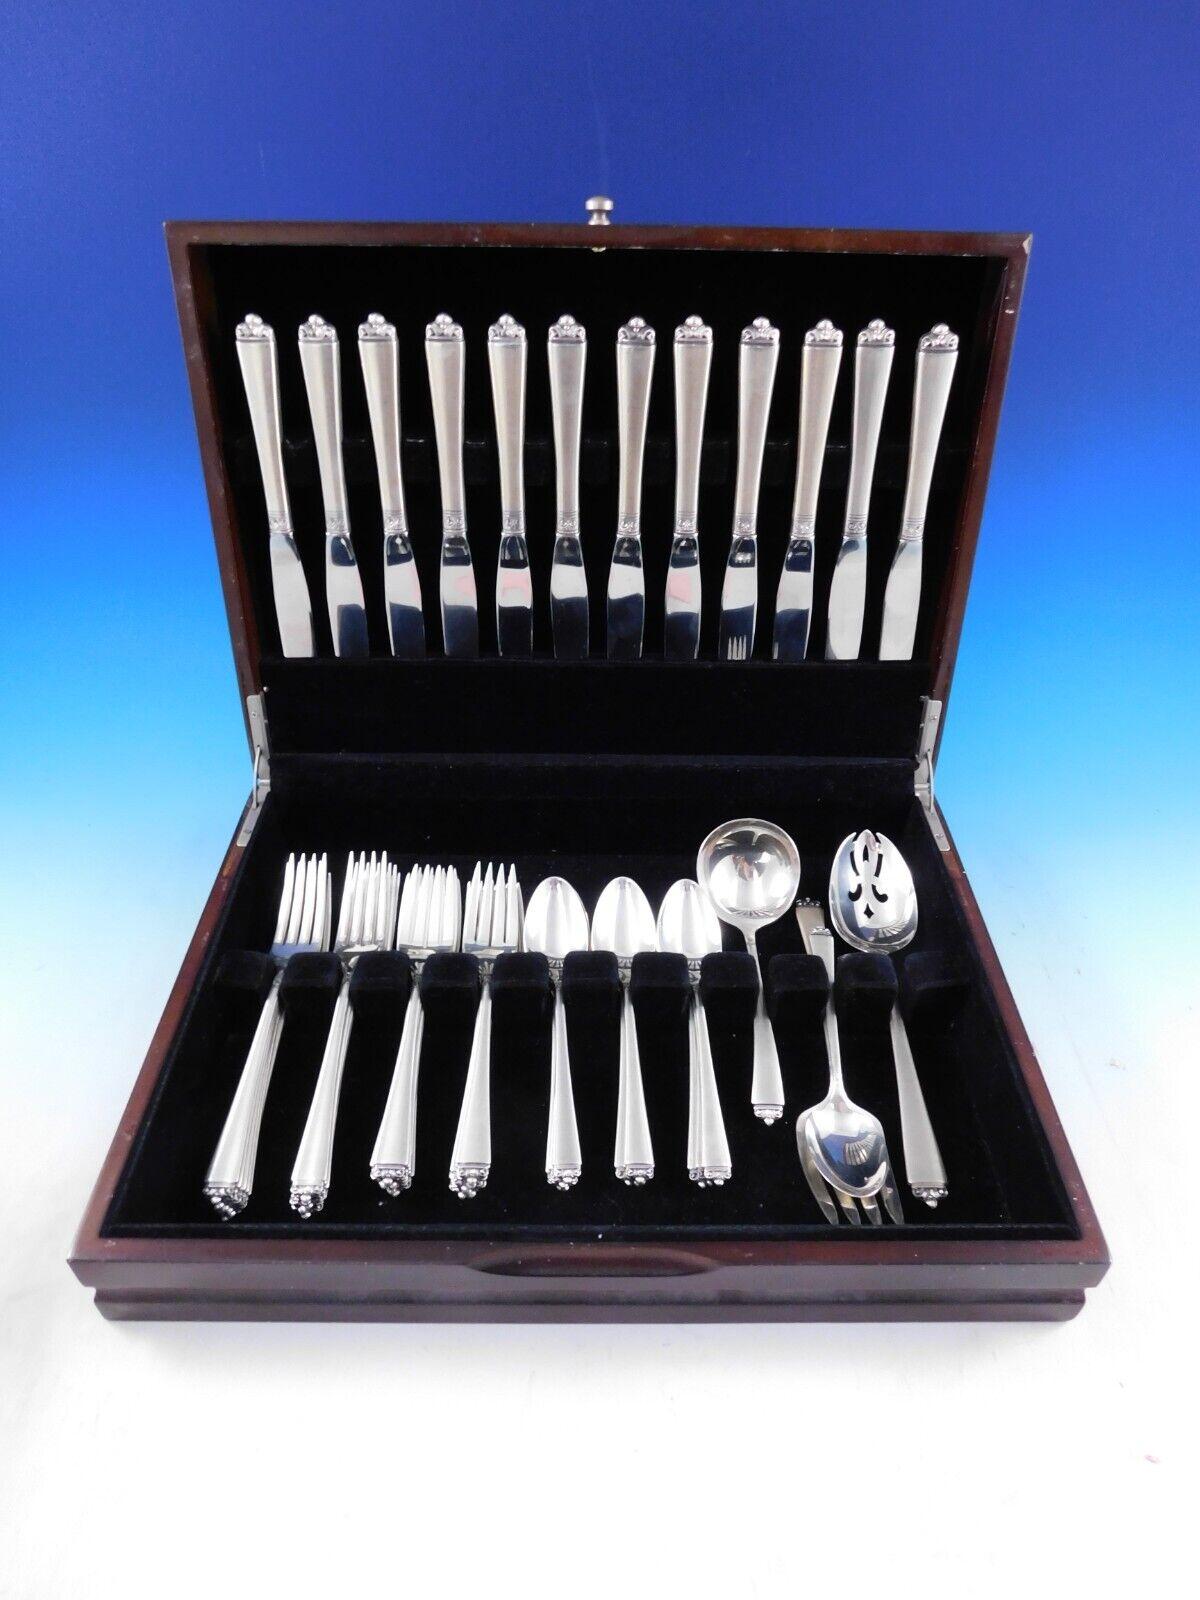 Satin Beauty by Oneida sterling silver Flatware set with satin finish, 52 pieces. This set includes:

12 Knives, 8 7/8